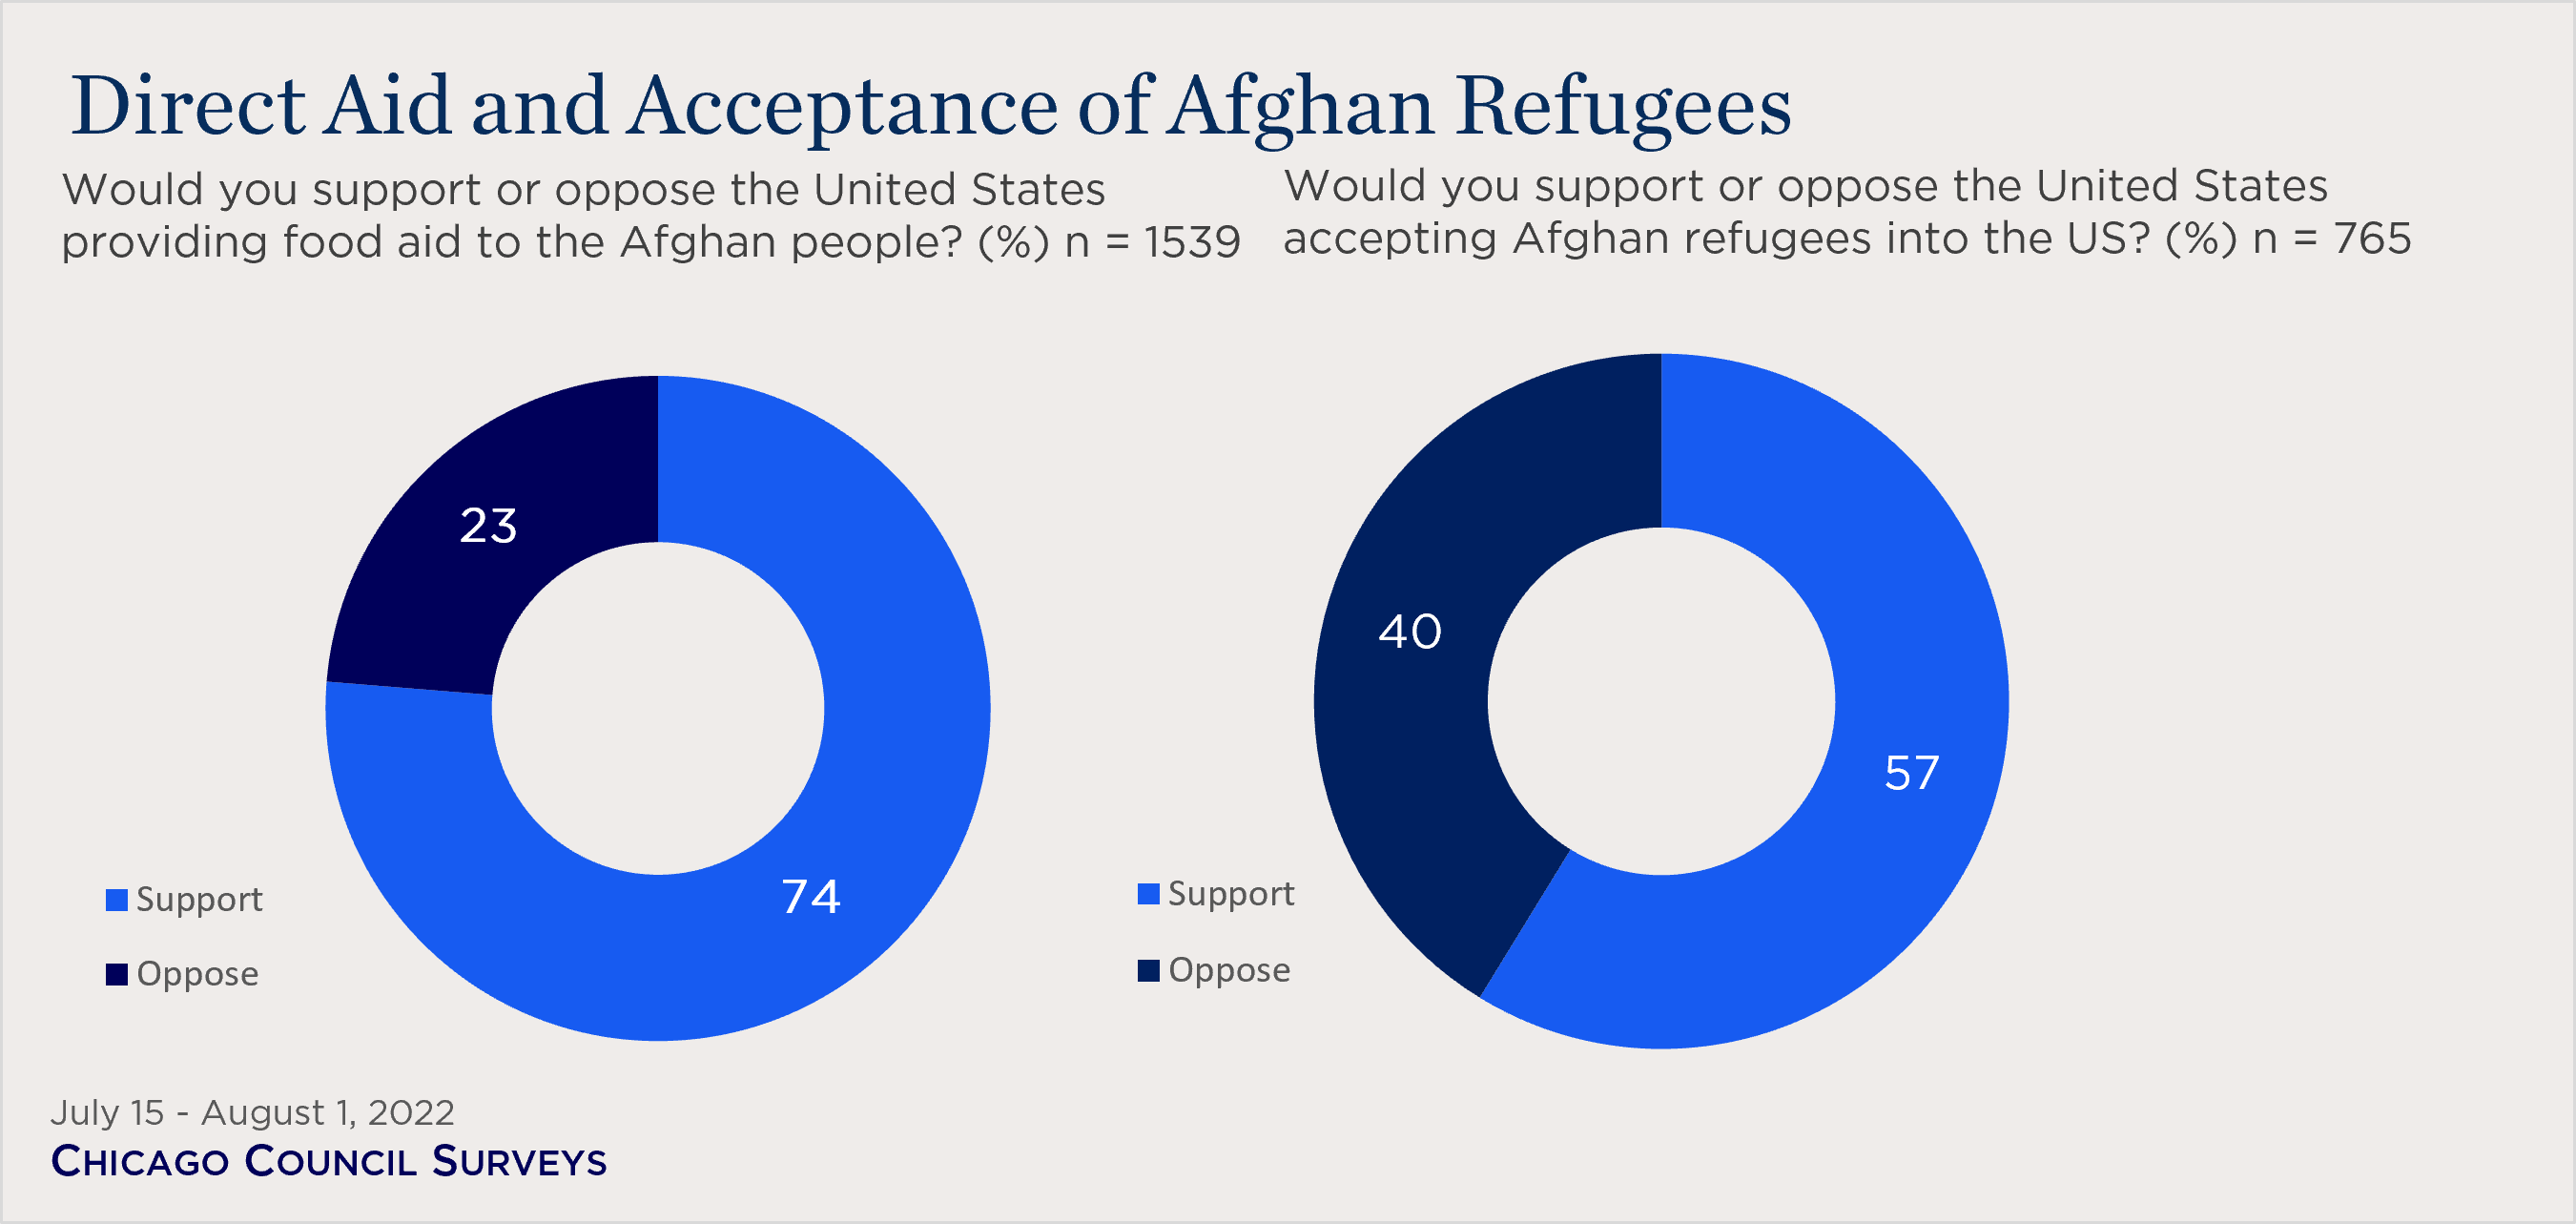 "pie chart showing views on direct aid to Afghans and accepting Afghan refugees"